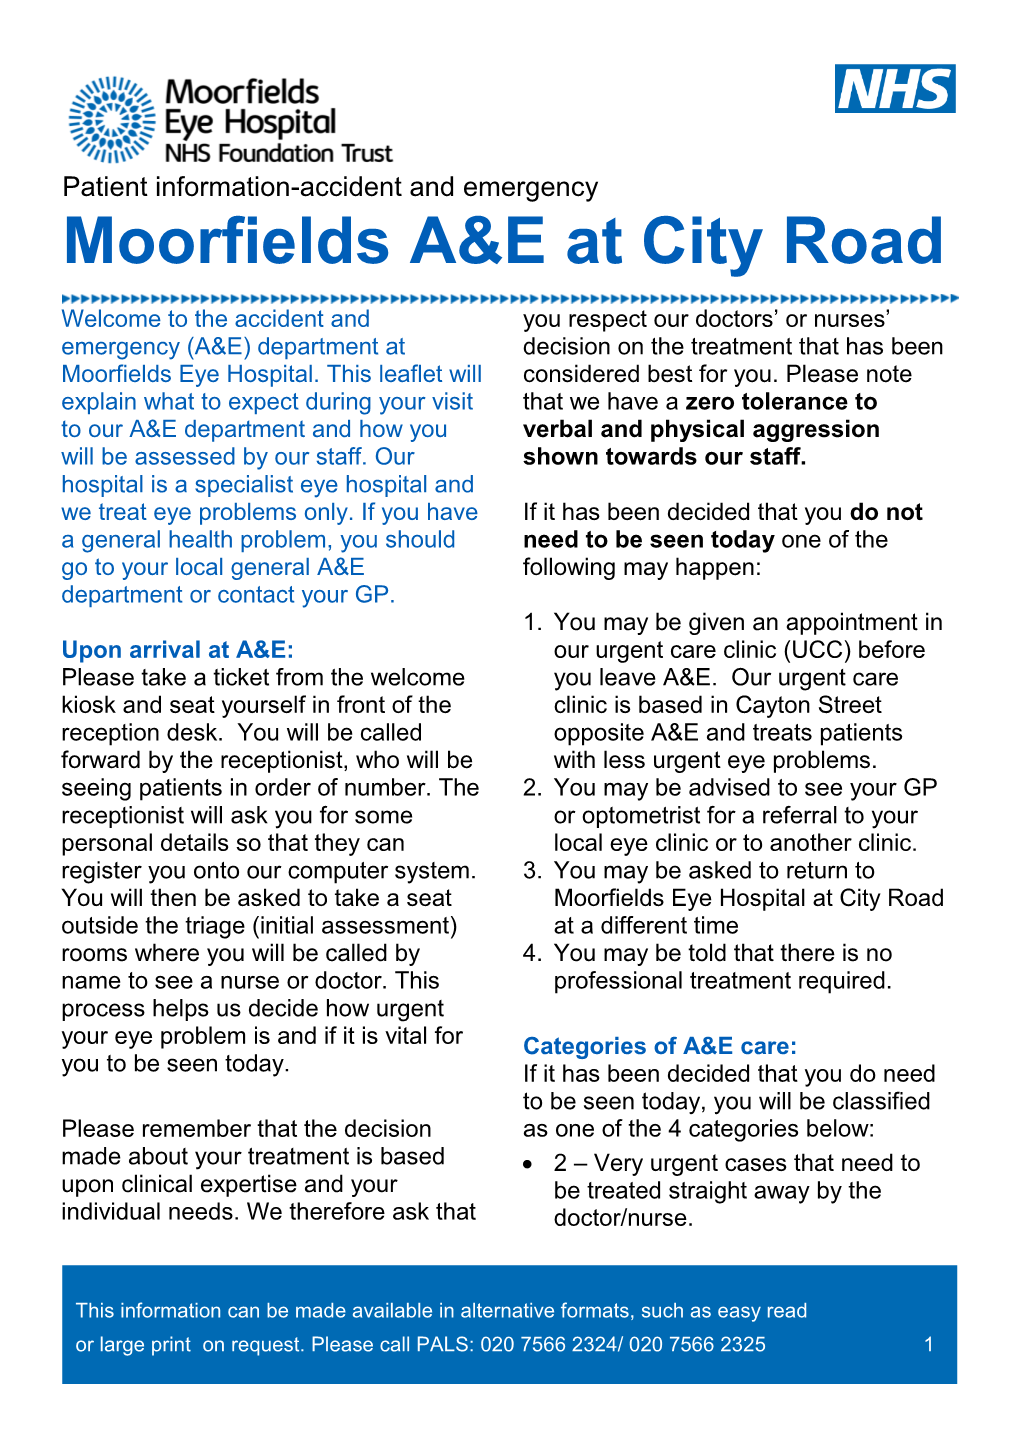 Moorfields A&E at City Road